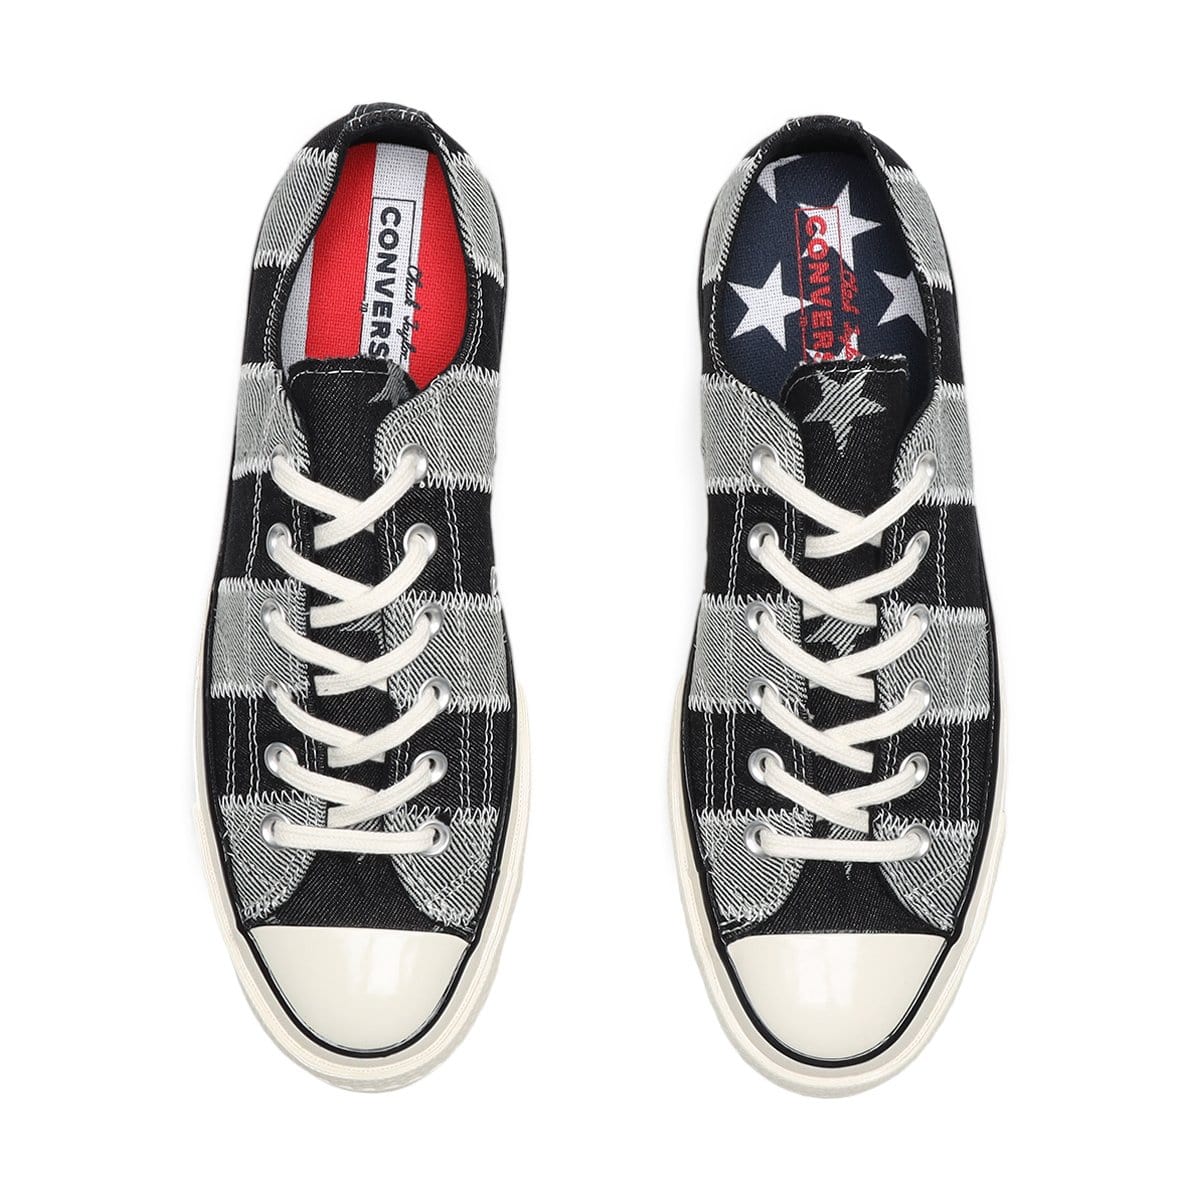 Converse Shoes CHUCK 70 OX (Archive Stars & Stripes)